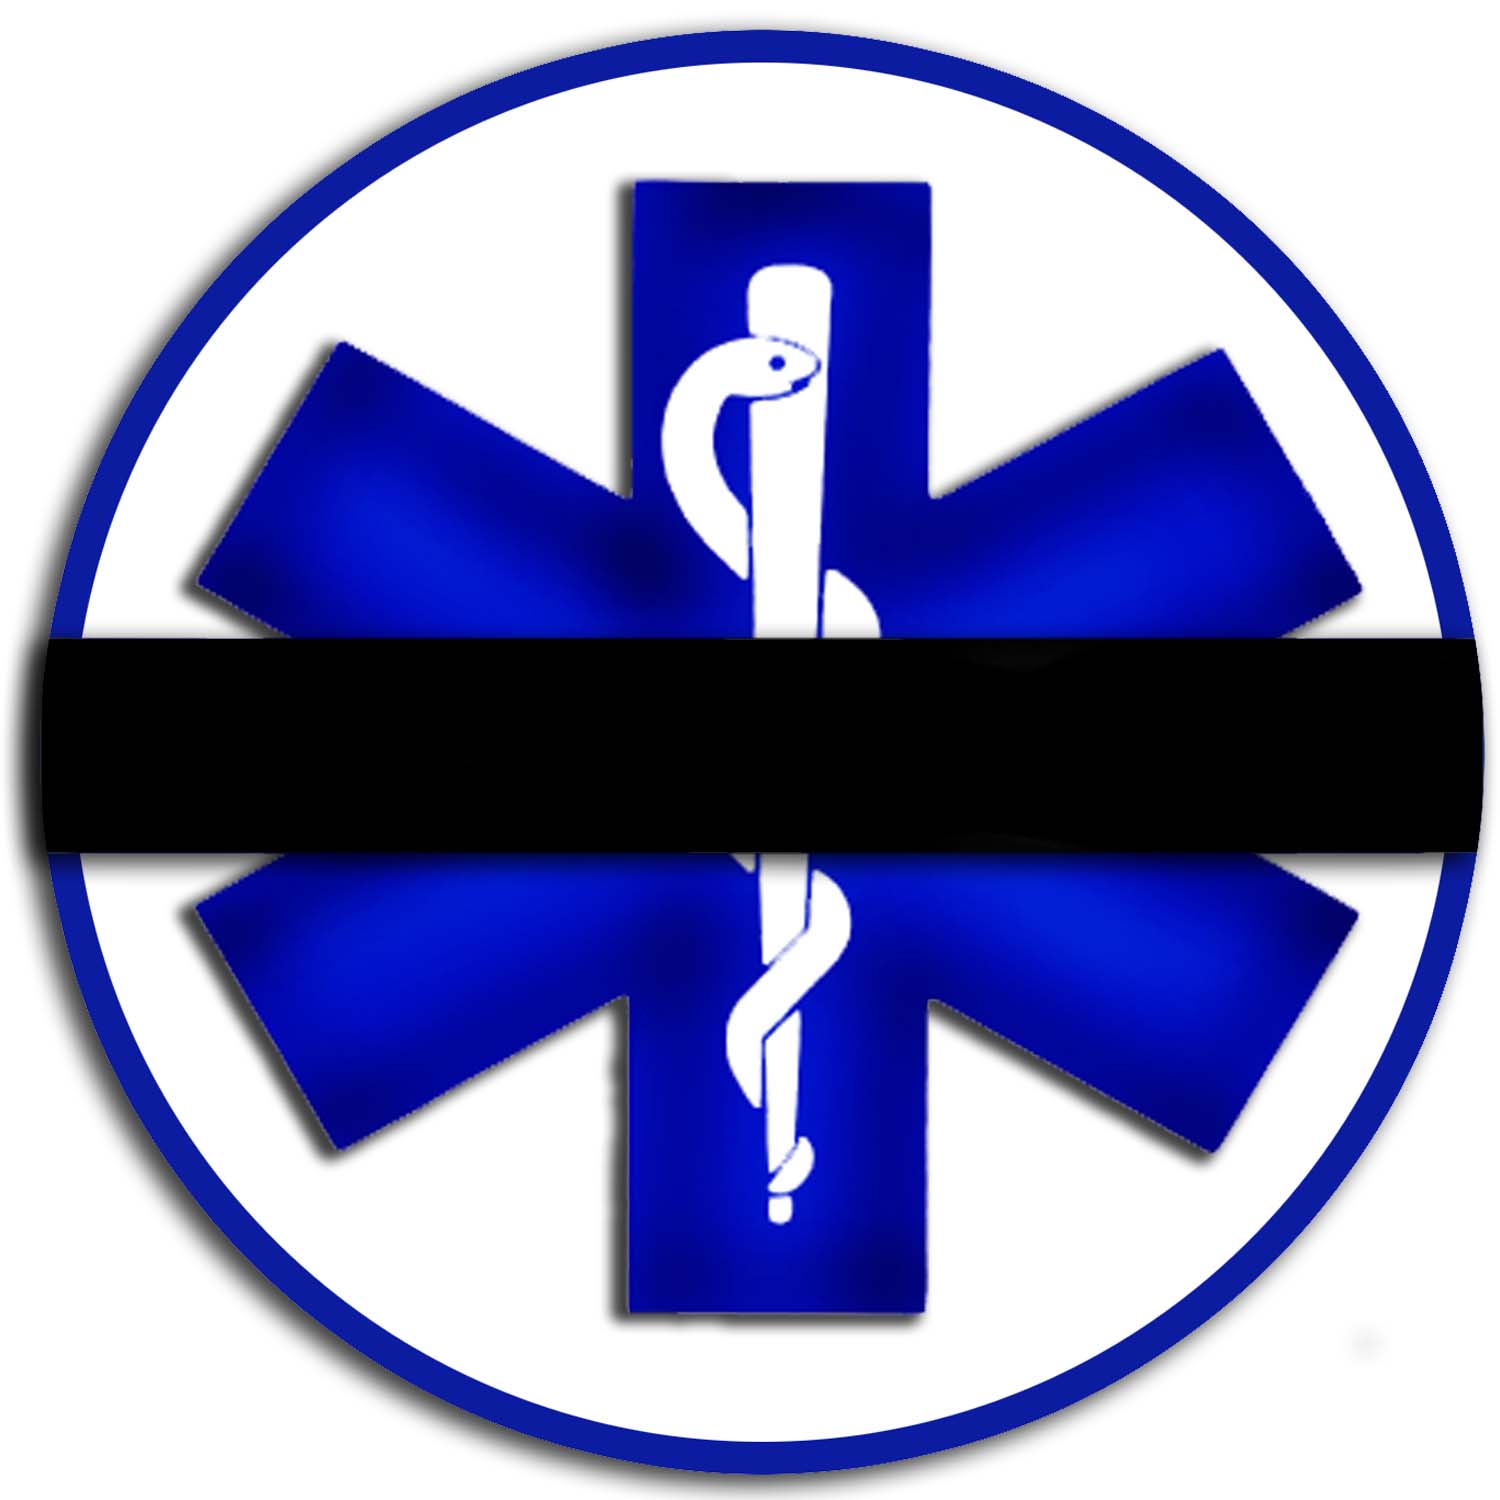 Star of Life in mourning